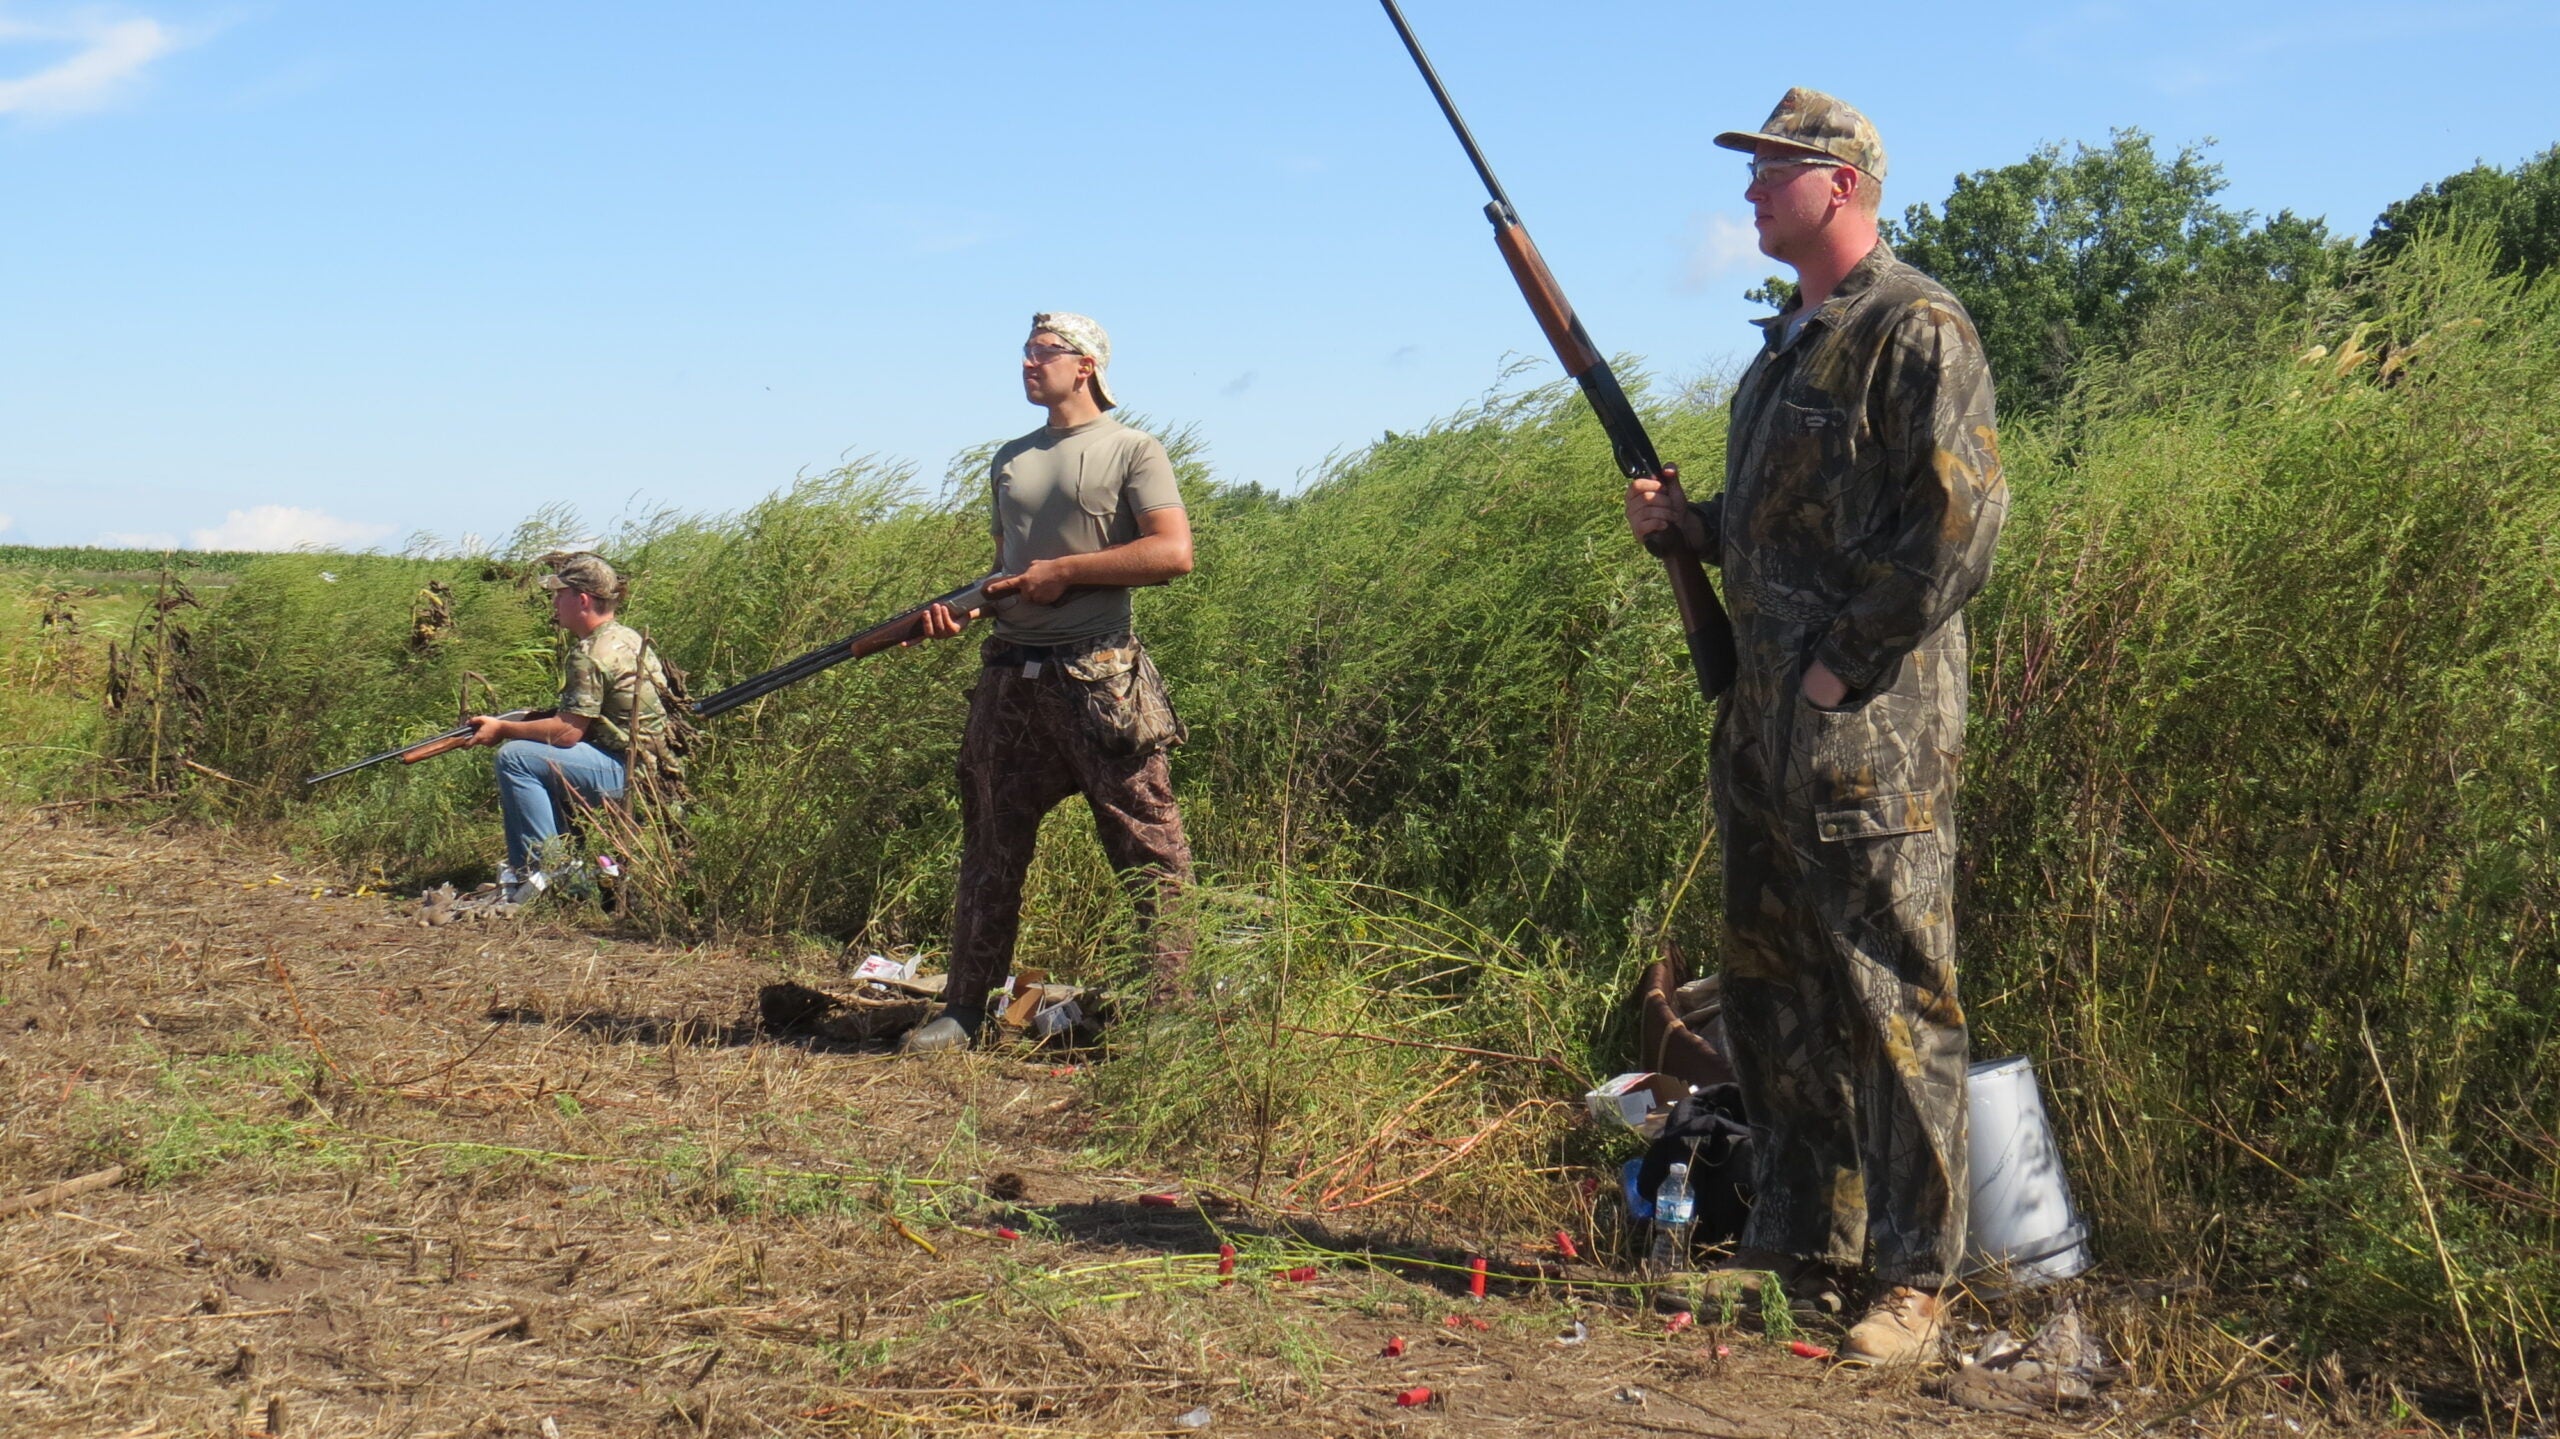 group of men dove hunting.